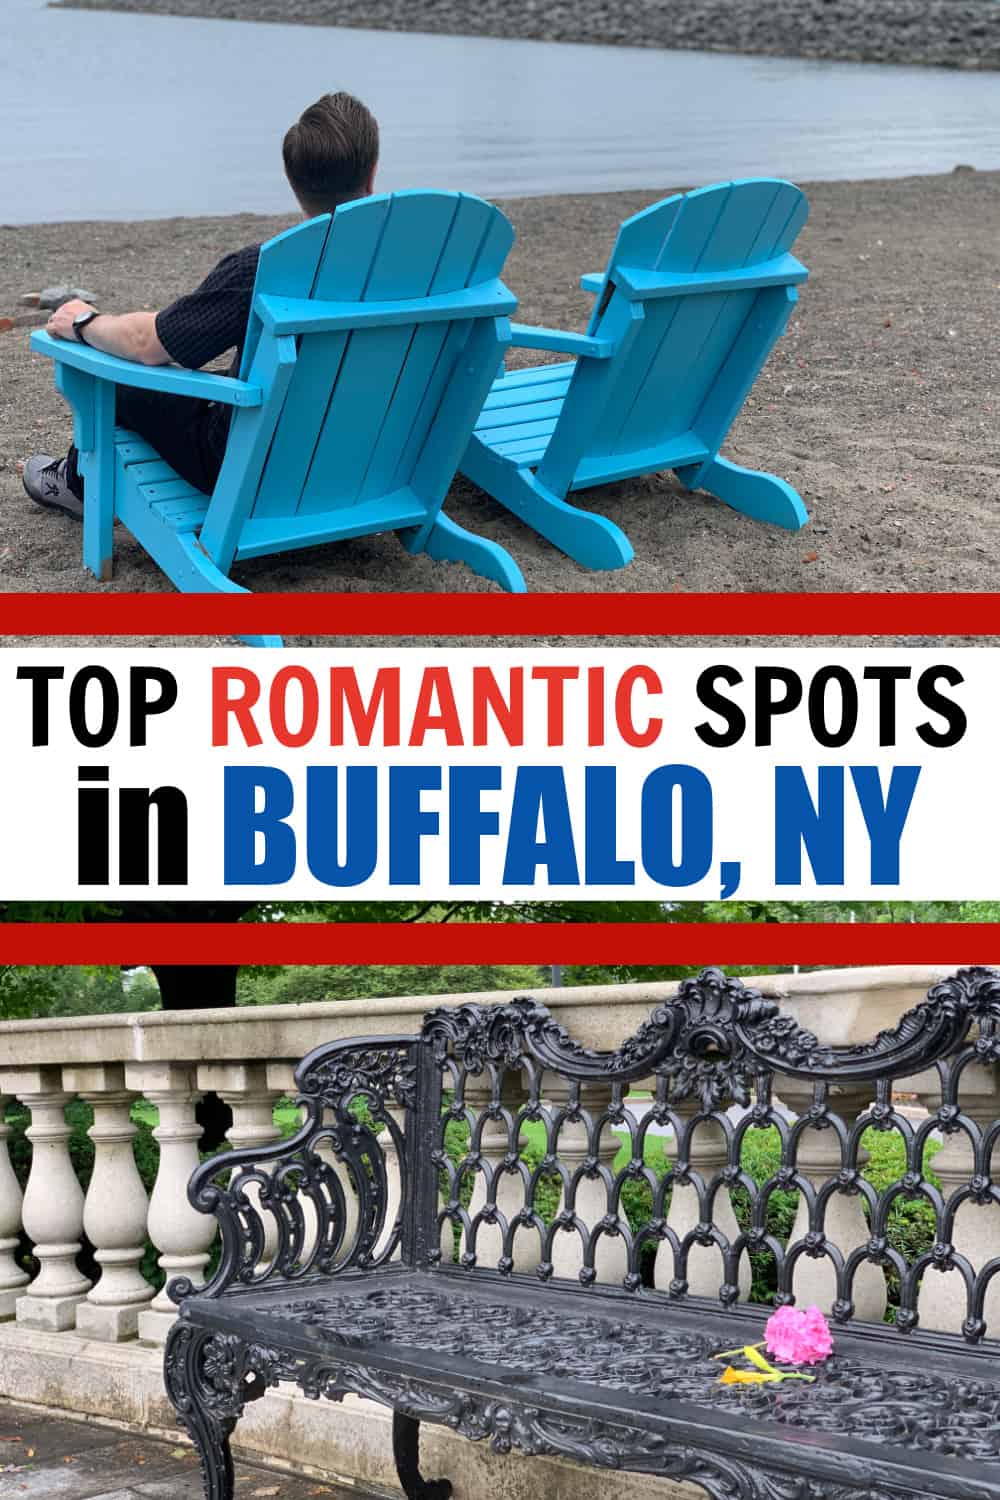 If you're looking for romantic things to do in Buffalo, NY, for couples, there ar eplenty! From gorgeous river cruises to carousel rides to gorgeous lake views, here are my top picks! #IntheBUF #BuffaloNY #ILoveNY #couplestravel #couplesgetaway